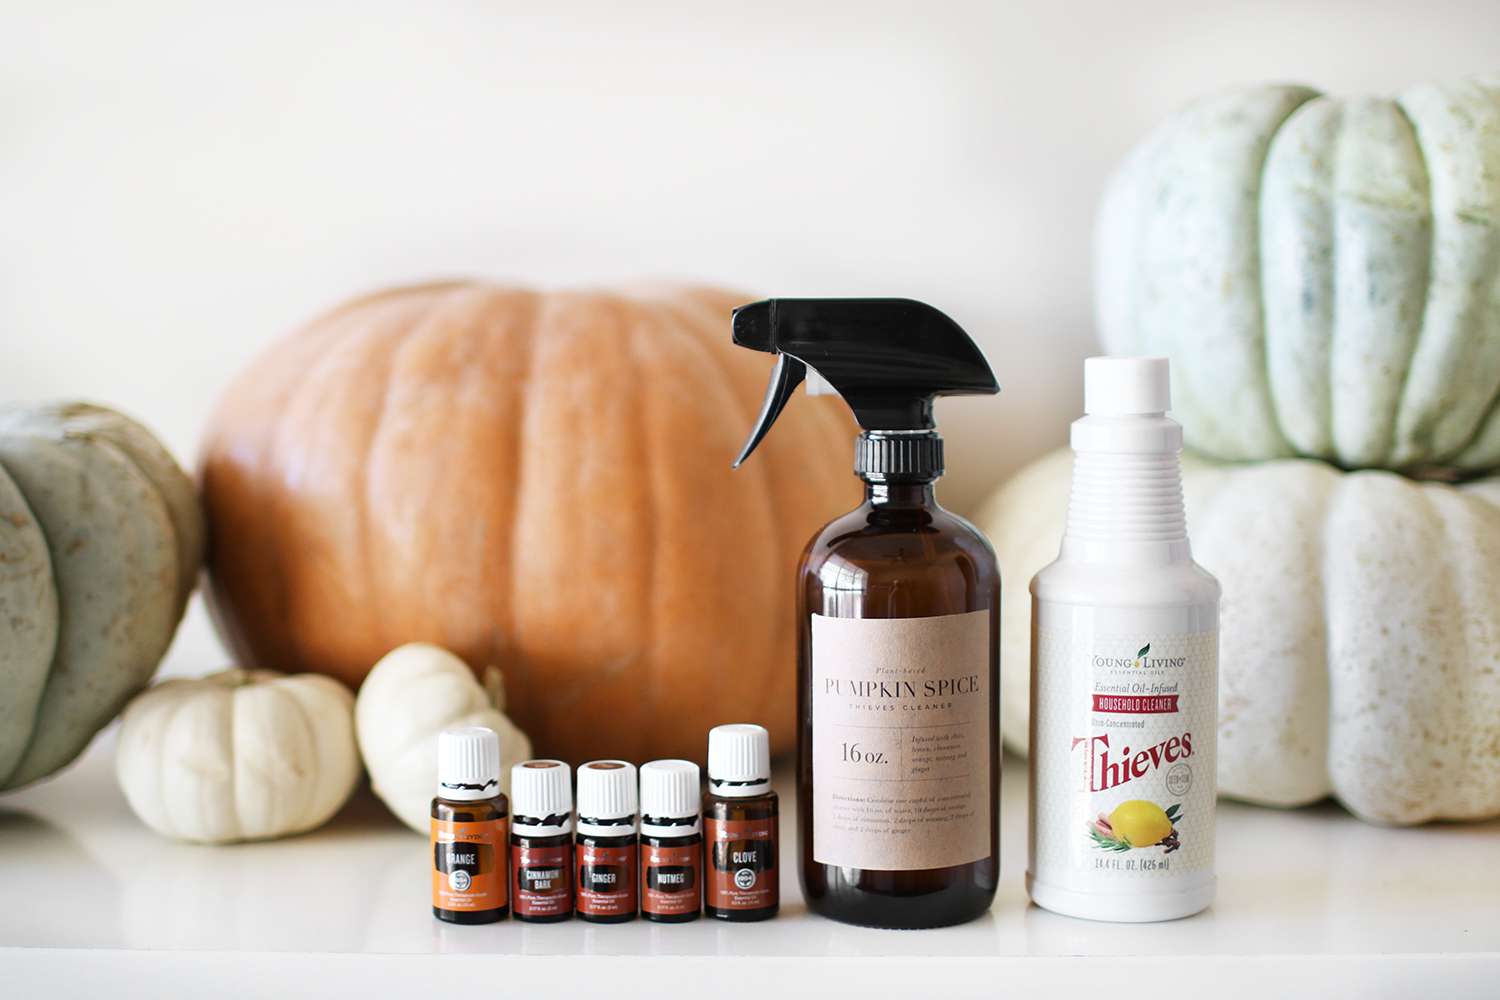 How to make pumpkin spice Thieves household cleaner. We love this cleaner and the changes it has brought to our home. And when September hits, I love transforming it into a pumpkin spice scented wonder. Catch the recipe and how-to over on KaraLayne.com! #ThievesCLeaner #YoungLiving #NonToxicCleaner #NonToxicHouseholdCleaner #PlantBasedCleaner #CleanLiving #NonToxicHome #DitchingAndSwitching #EssentialOils